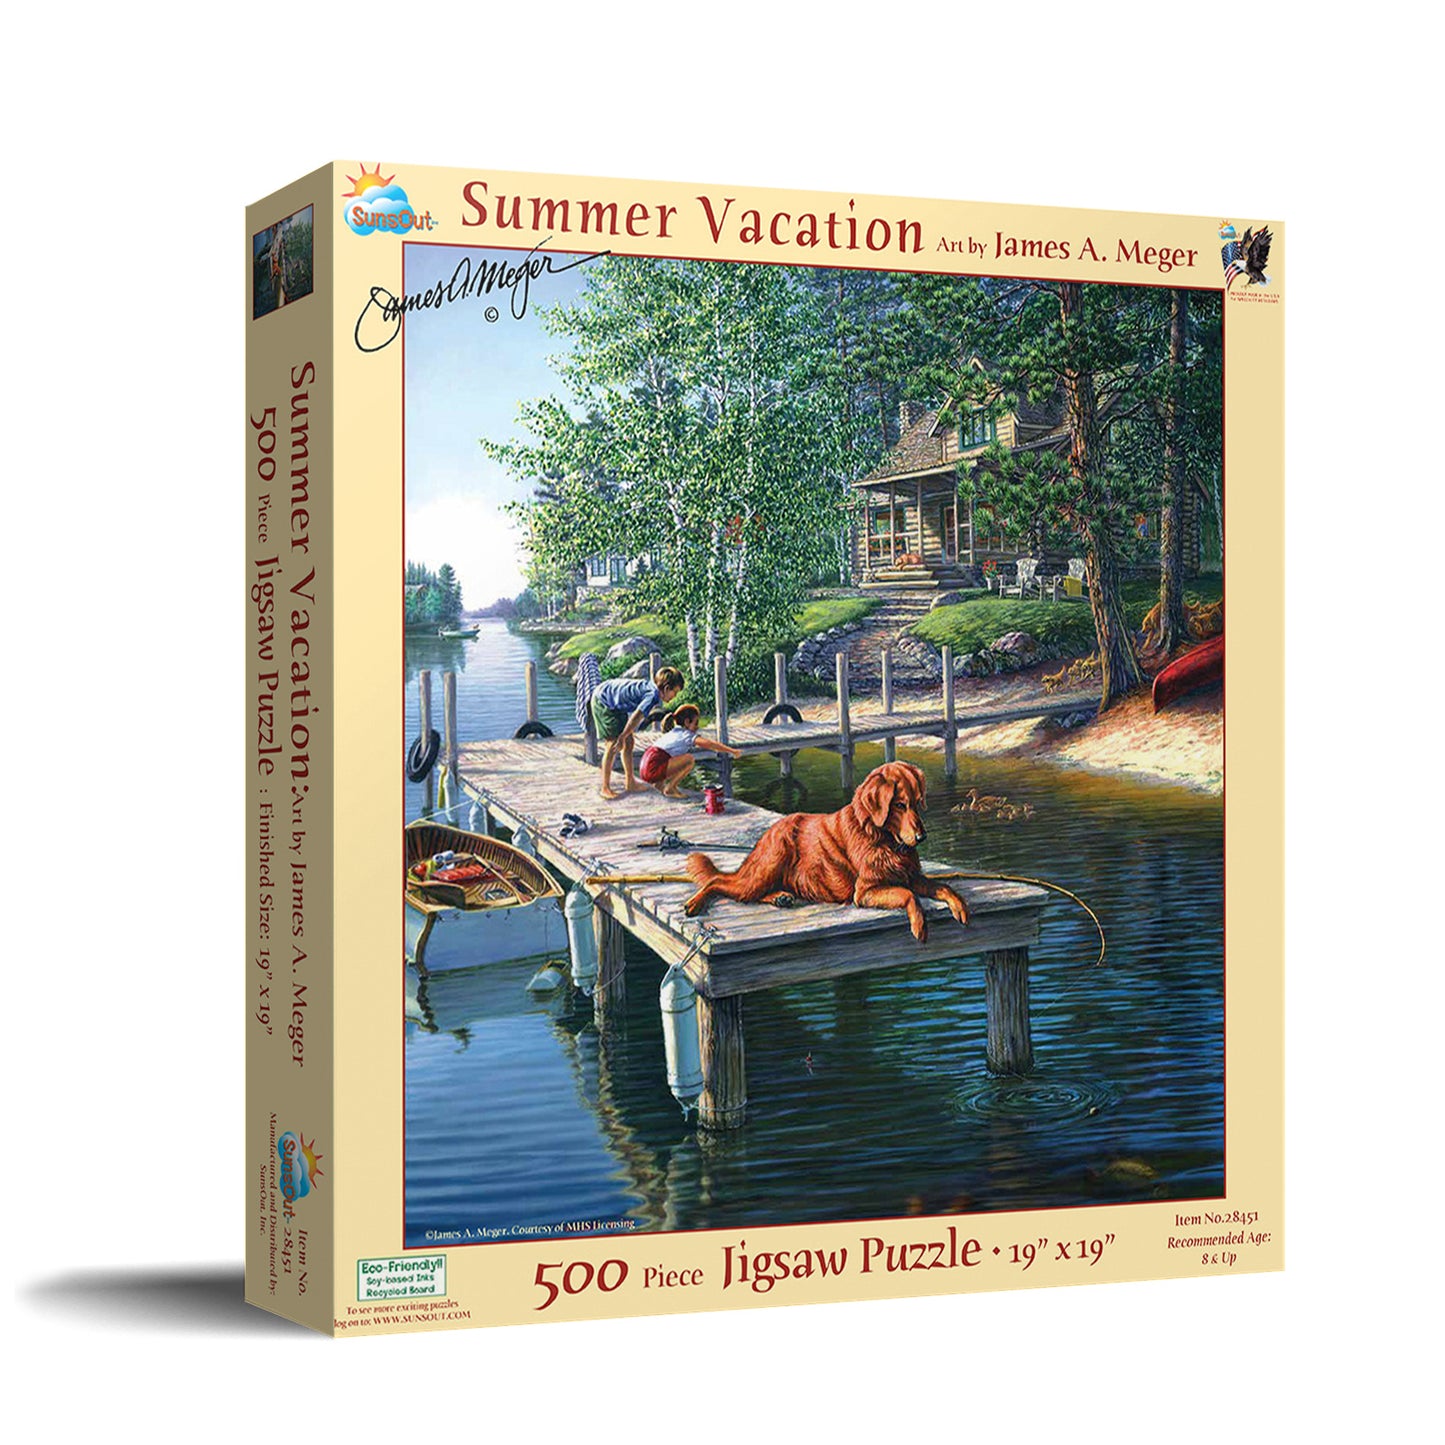 Summer Vacation - 500 Piece Jigsaw Puzzle